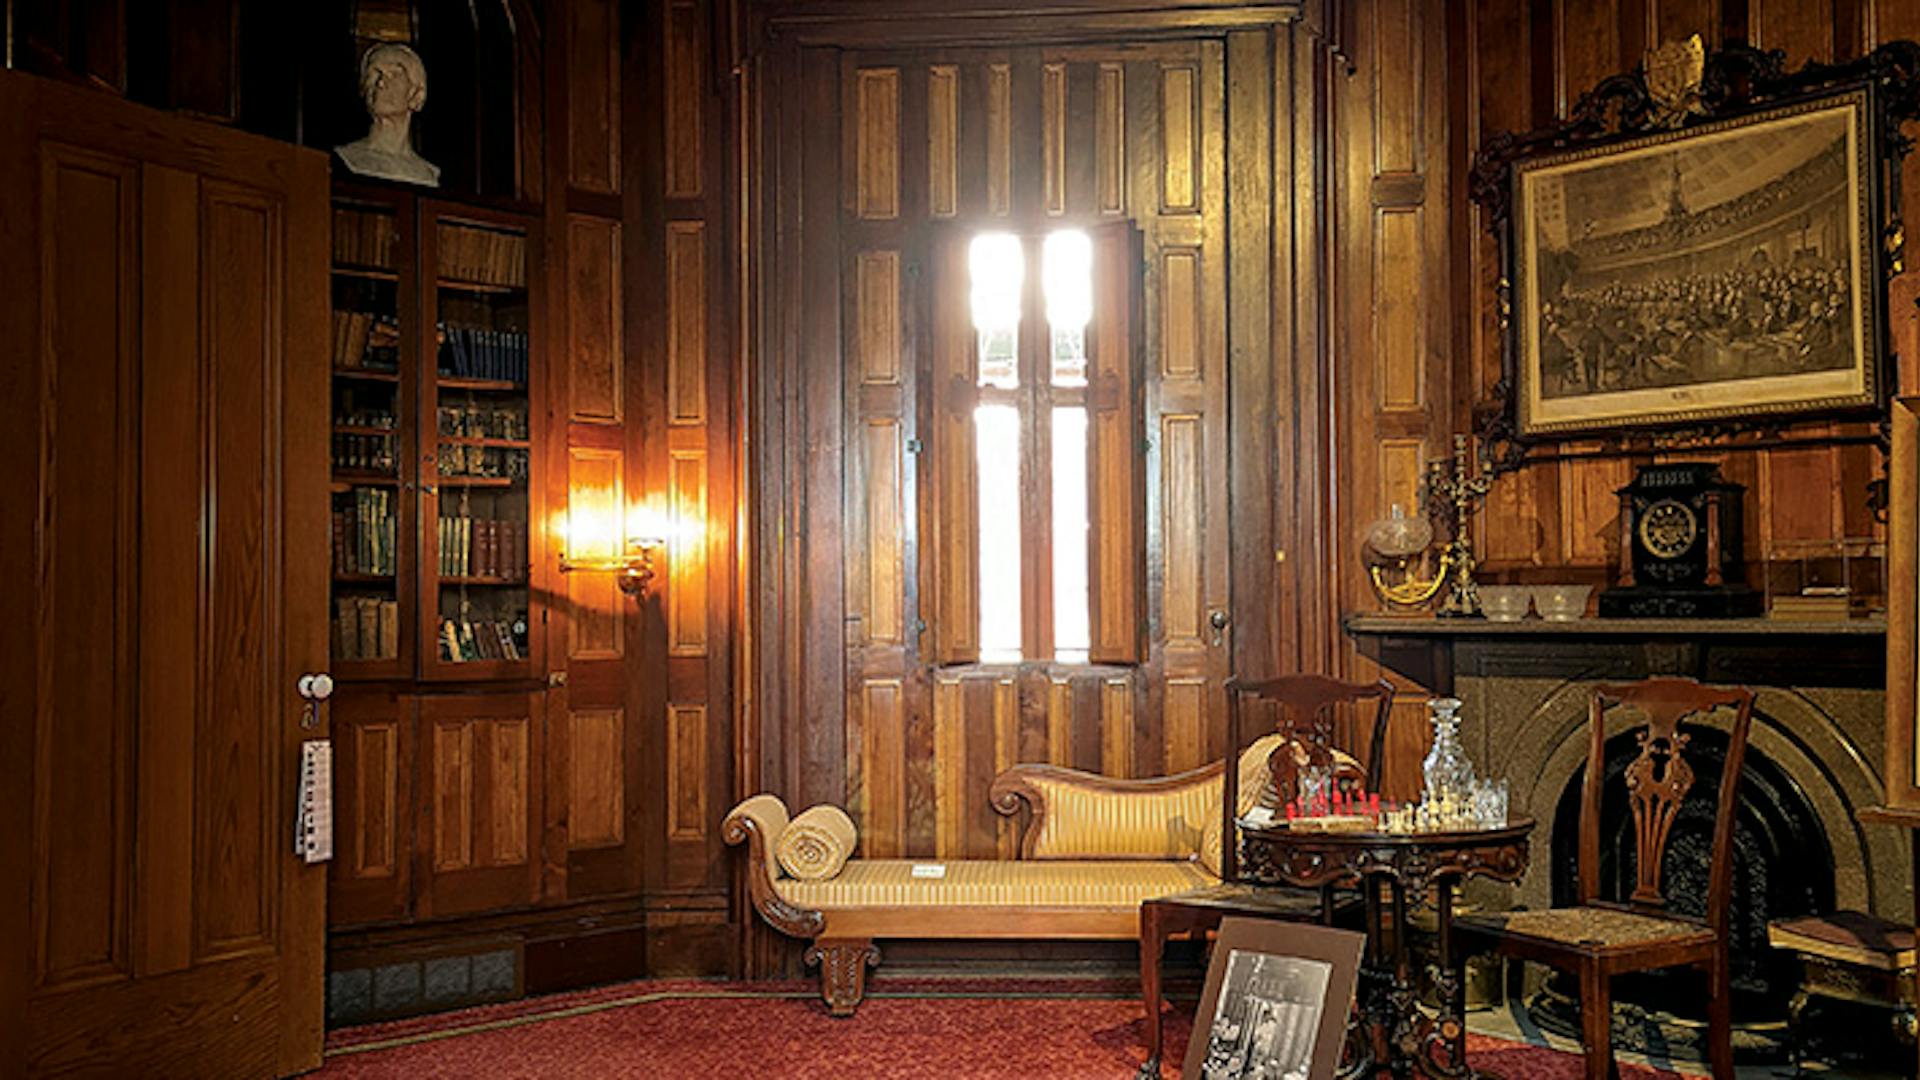 Interior of The Henry Clay Estate in Lexington, Kentucky (photo courtesy of The Henry Clay Estate)